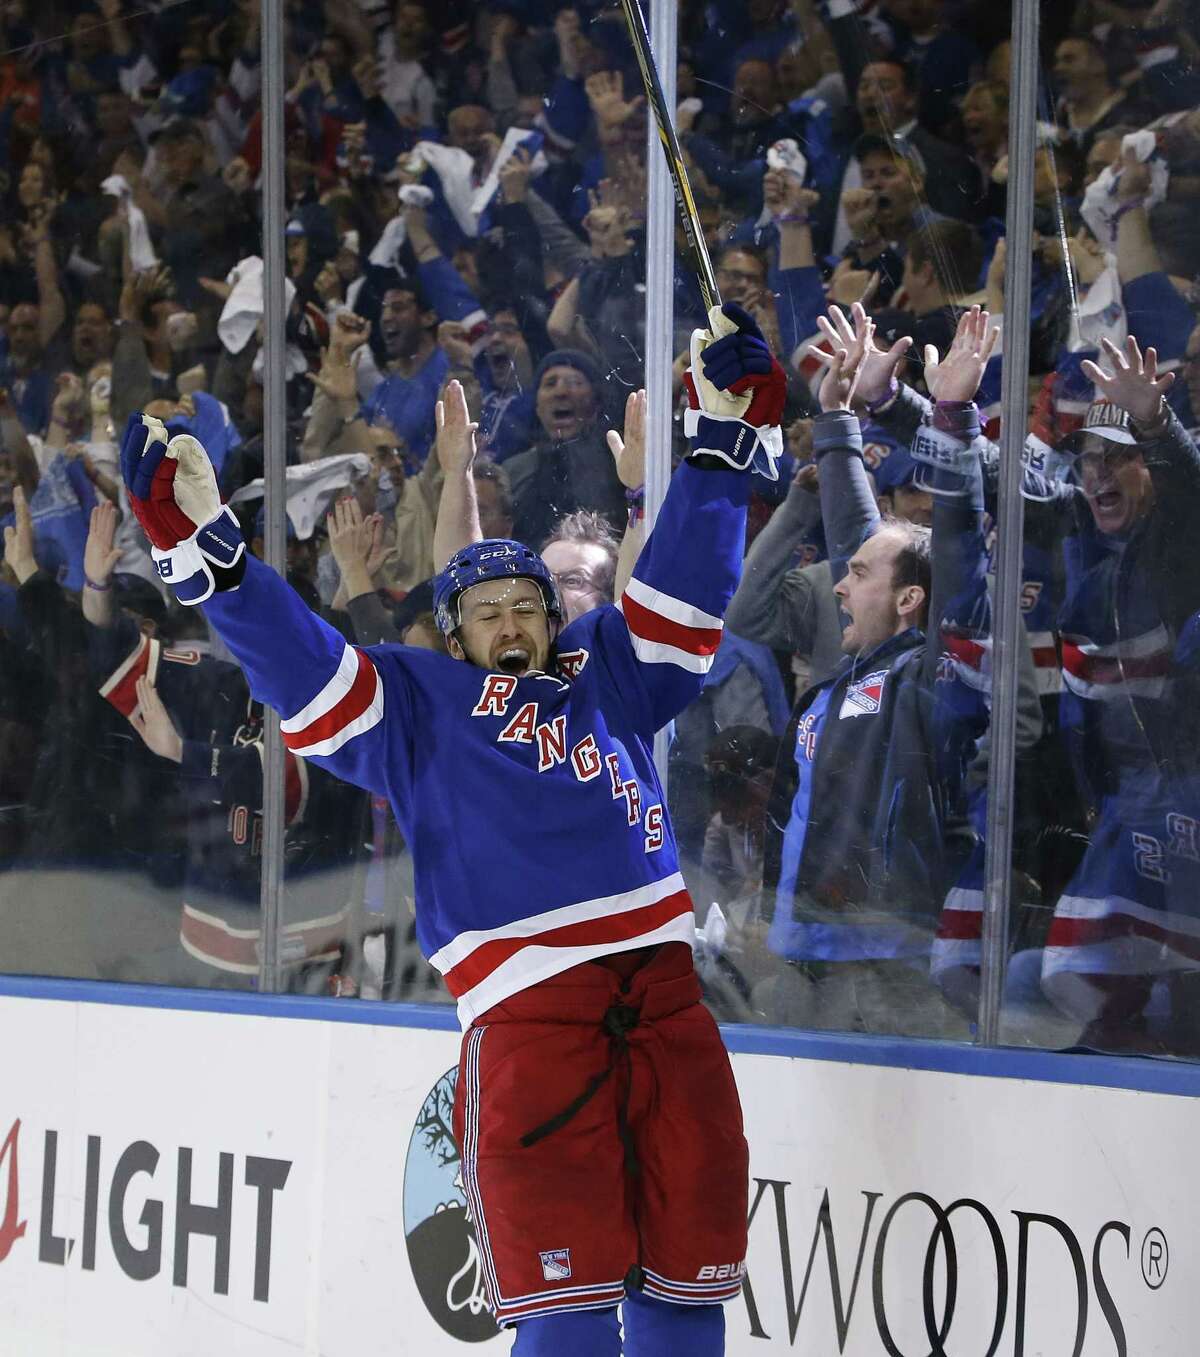 The New York Rangers have signed center Derek Stepan to a long-term contract.